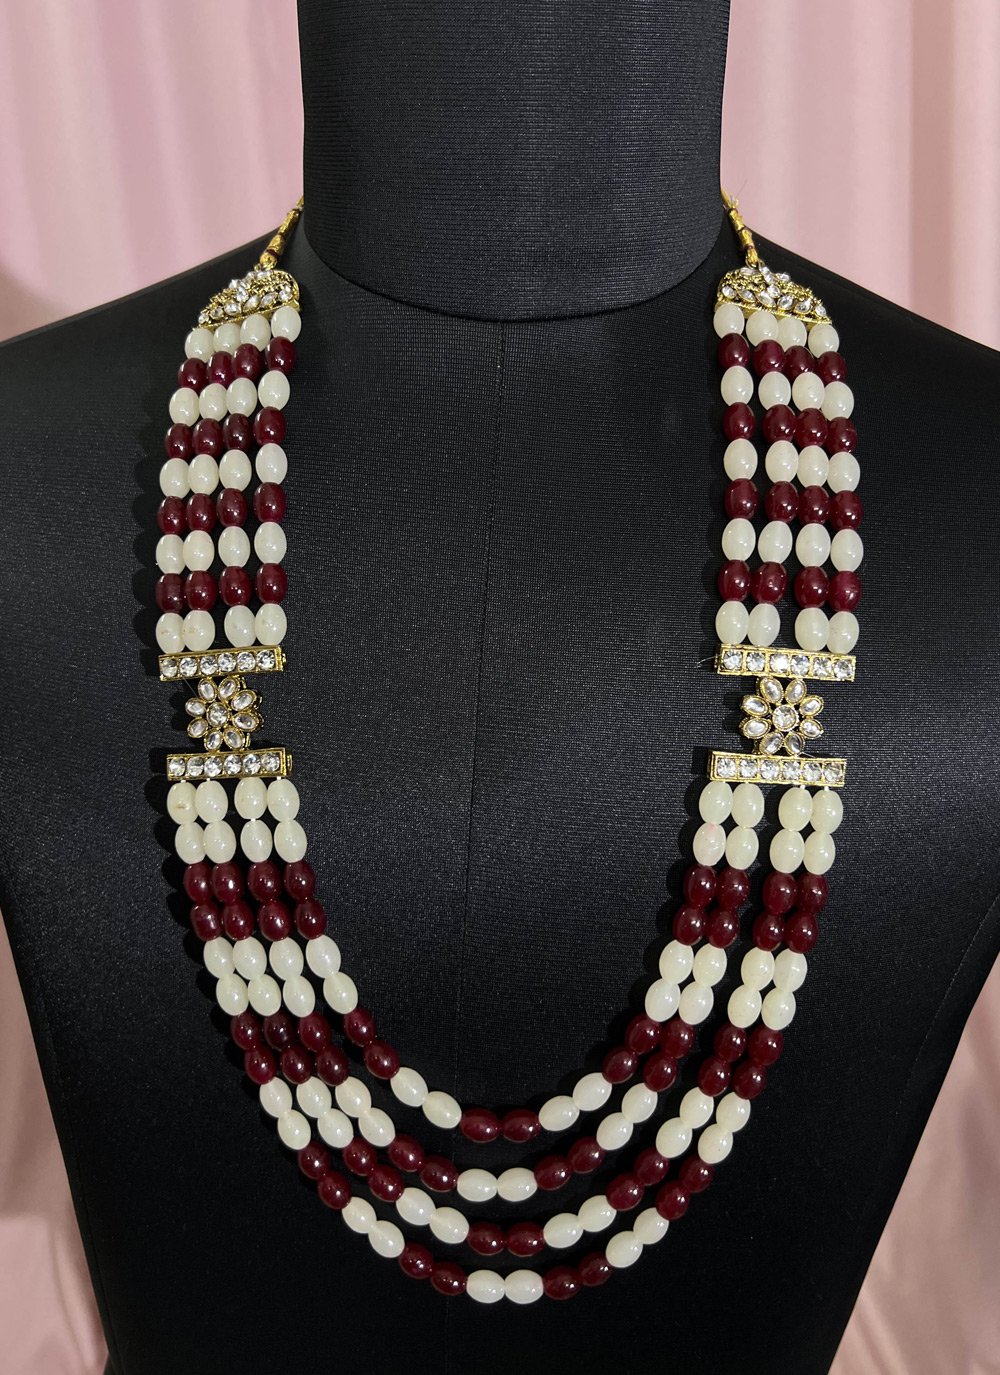 Artistic Alloy Beads Work Necklace